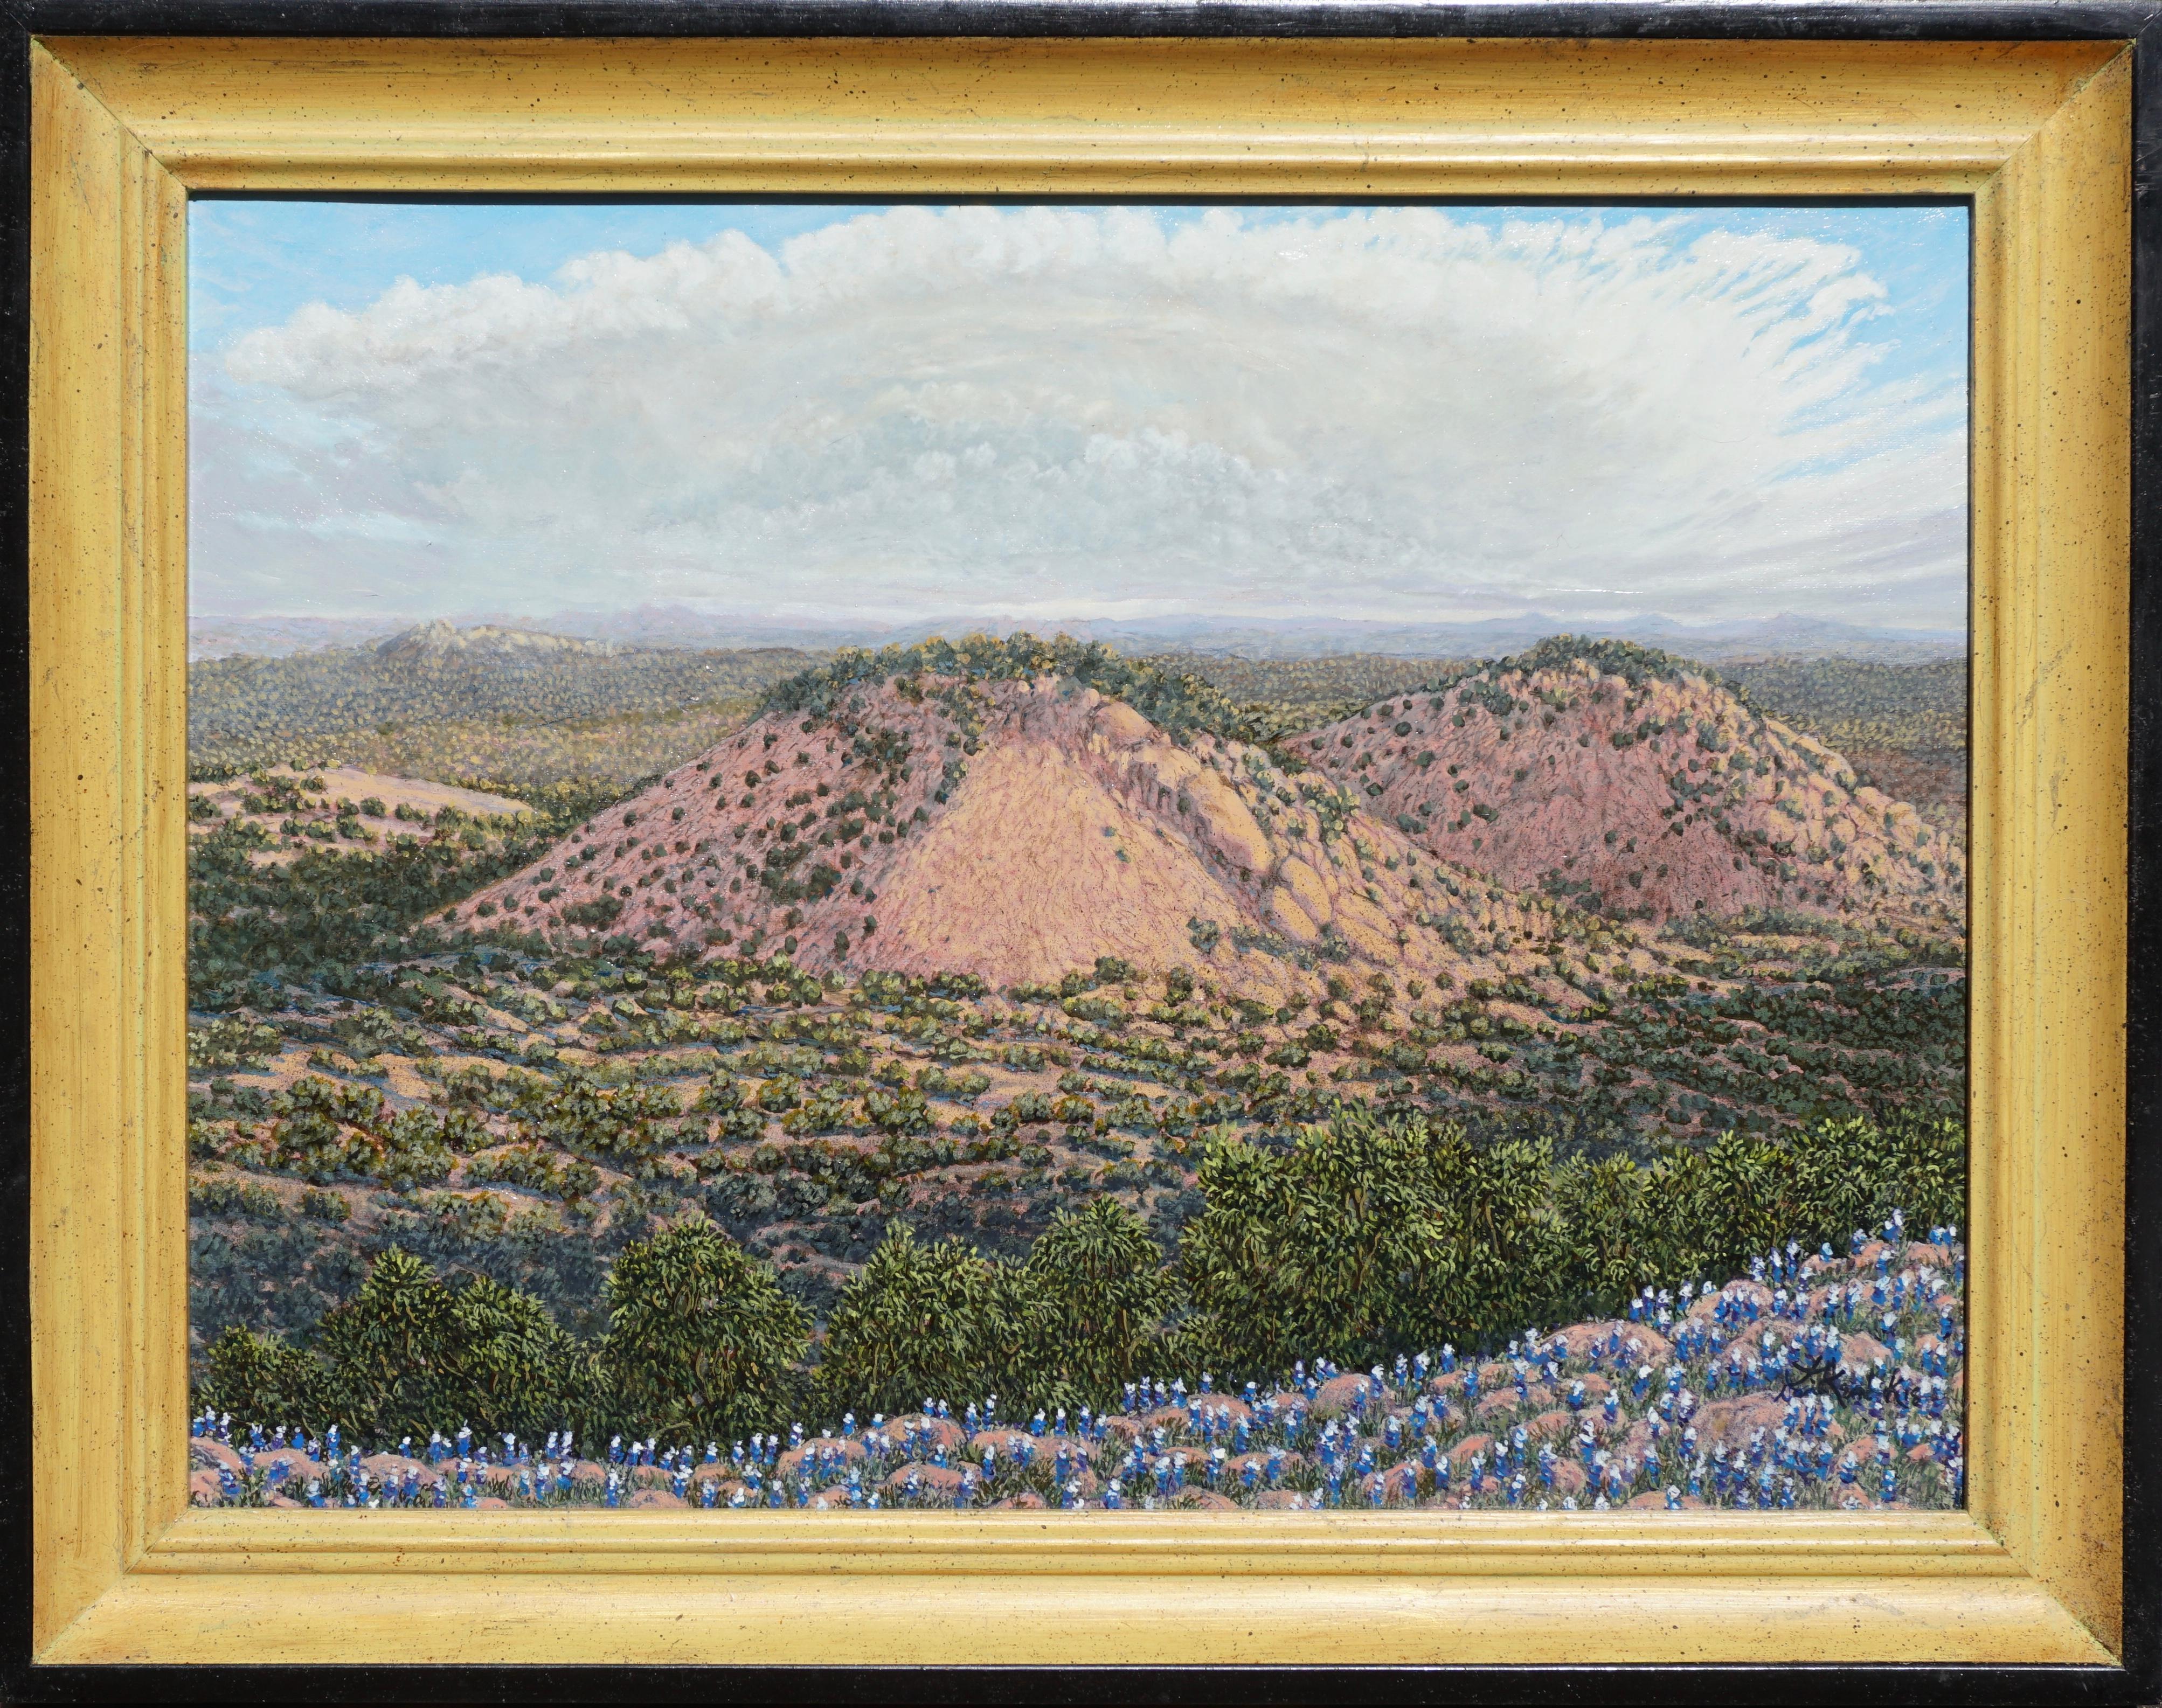 Daniel Kendrick Texas “Turkey’s Peak” Near Austin TX. 2018 oil painting. One of Texas’s most prolific landscape artists; Daniel shows his genius on his latest painting. Oil on canvas. You can almost see the bluebonnet pedals and all the leaves on